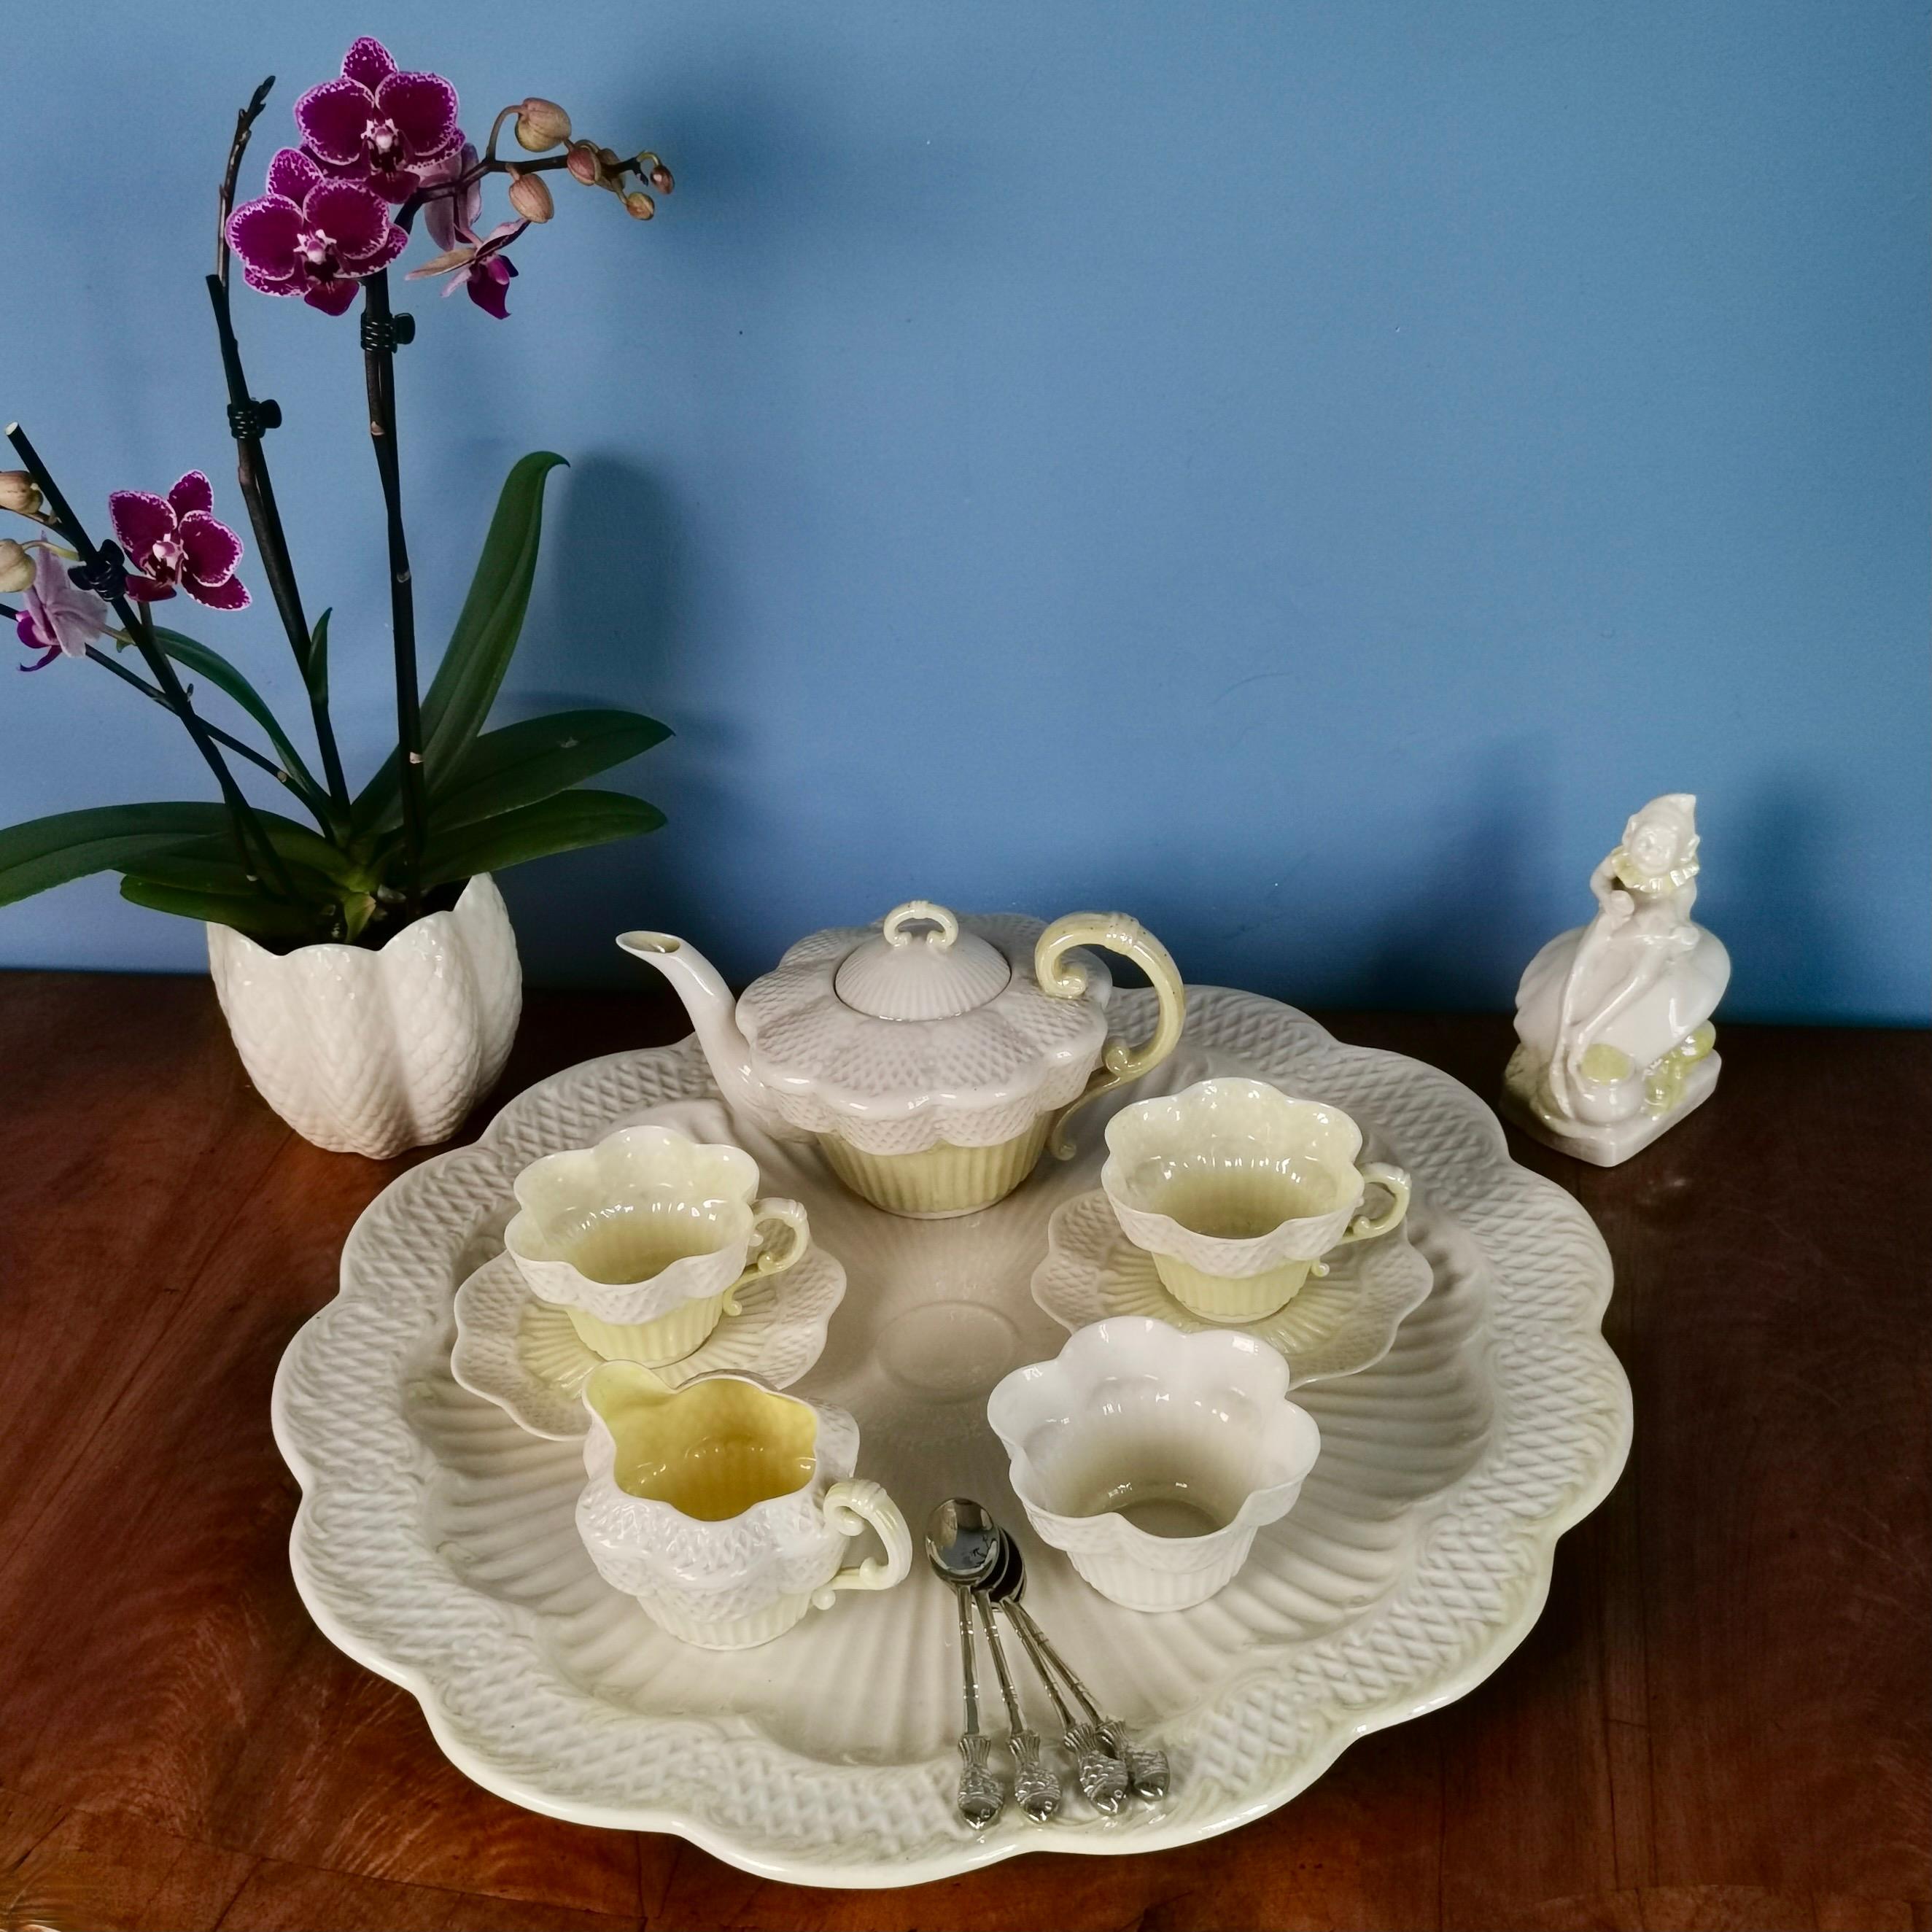 This is an extremely rare Belleek cabaret set for two, or 